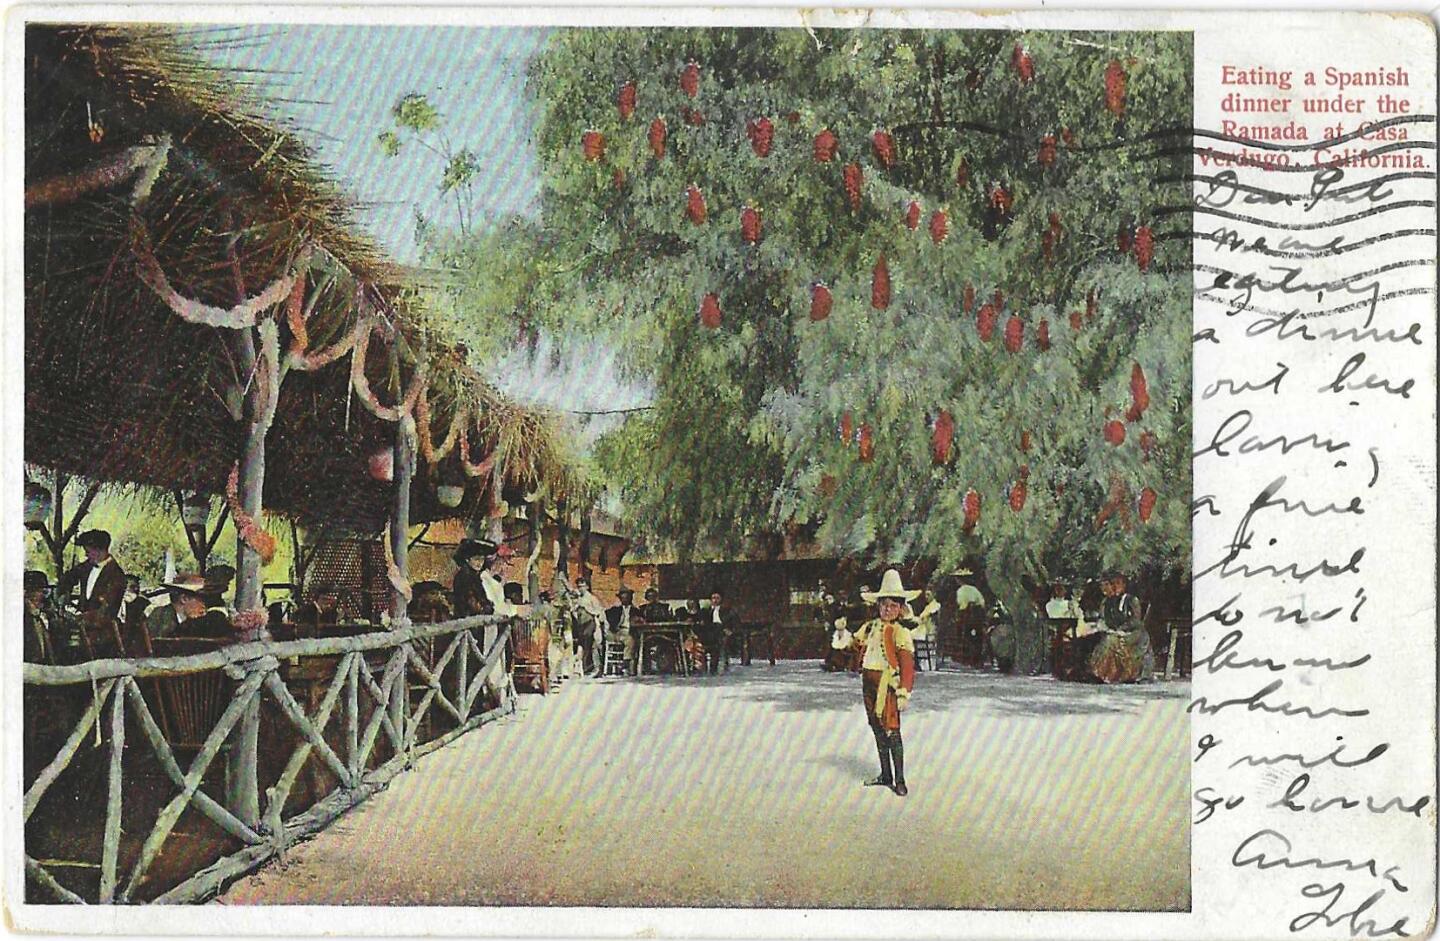 The front of a postcard depicting Casa Verdugo